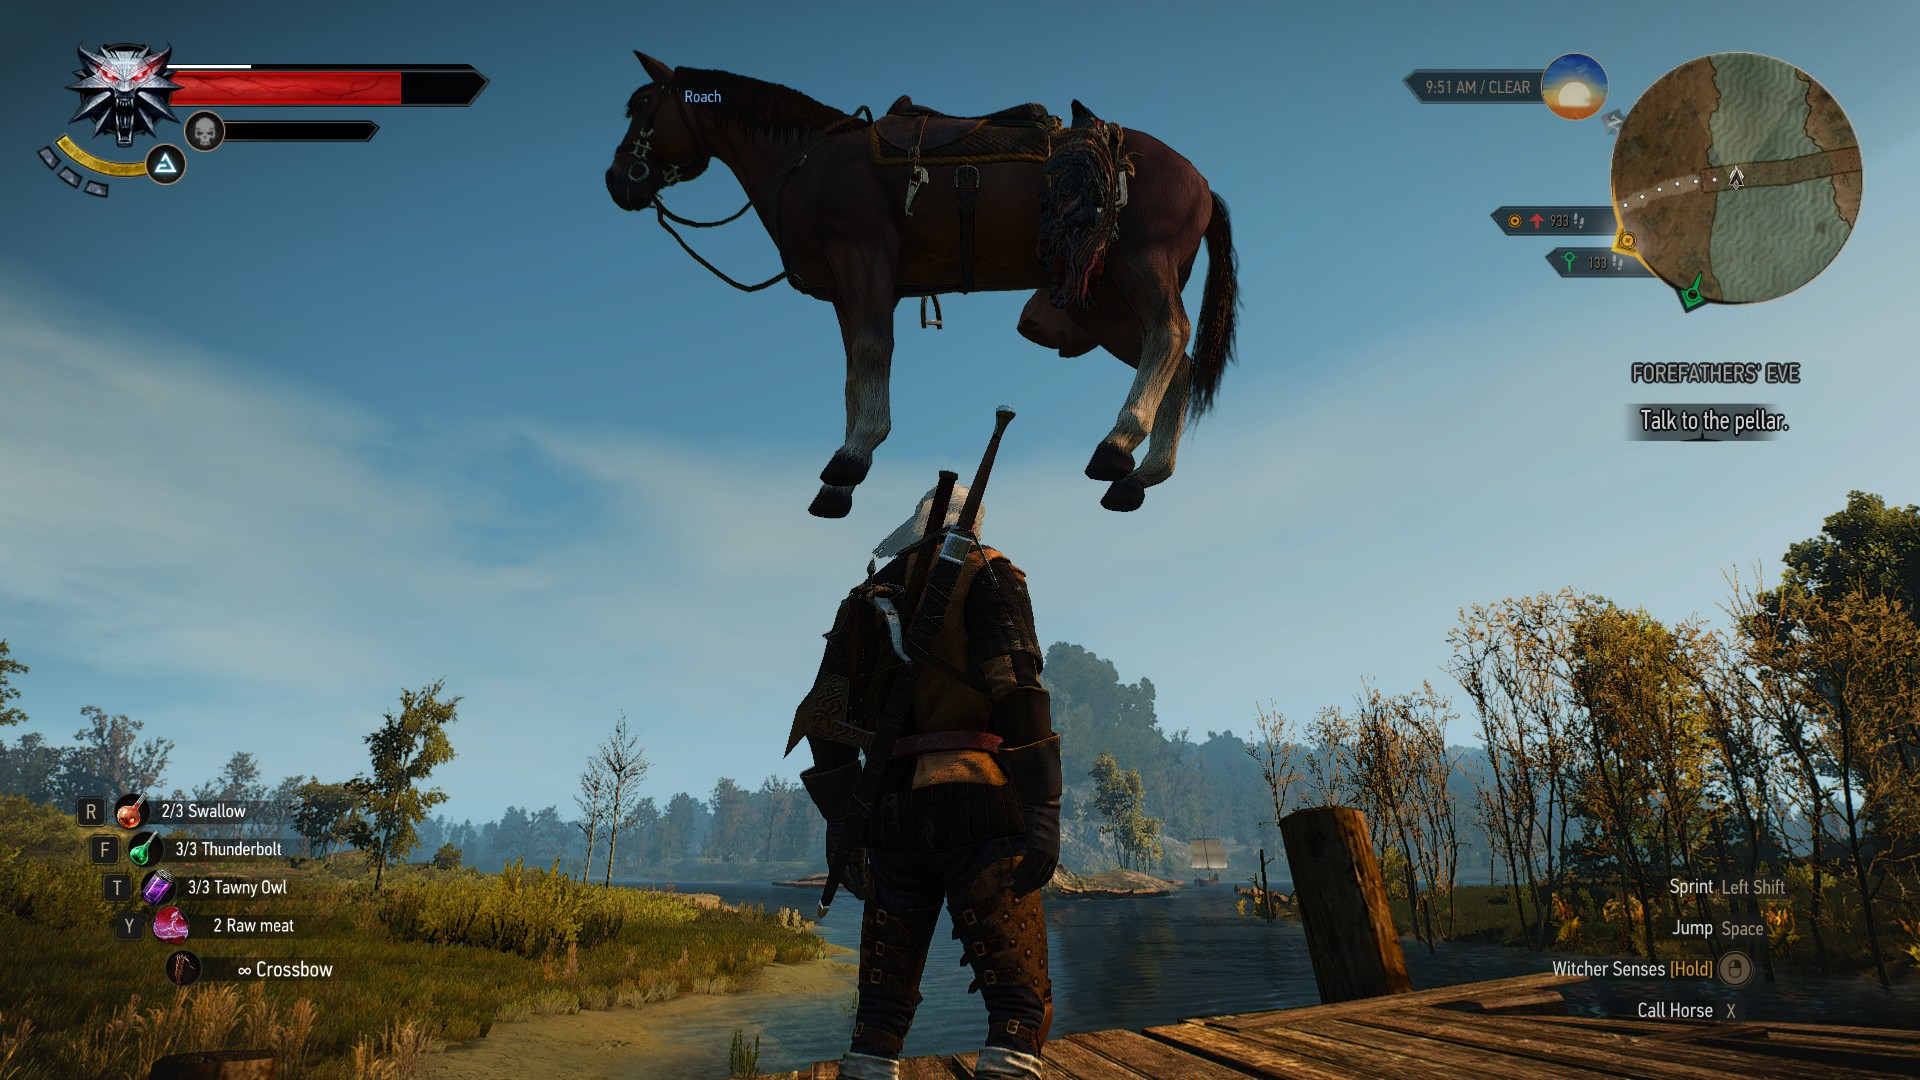 Glitchy Roach Card Is Too Good Not To Leave In The Witcher 3’s Gwent Spinoff